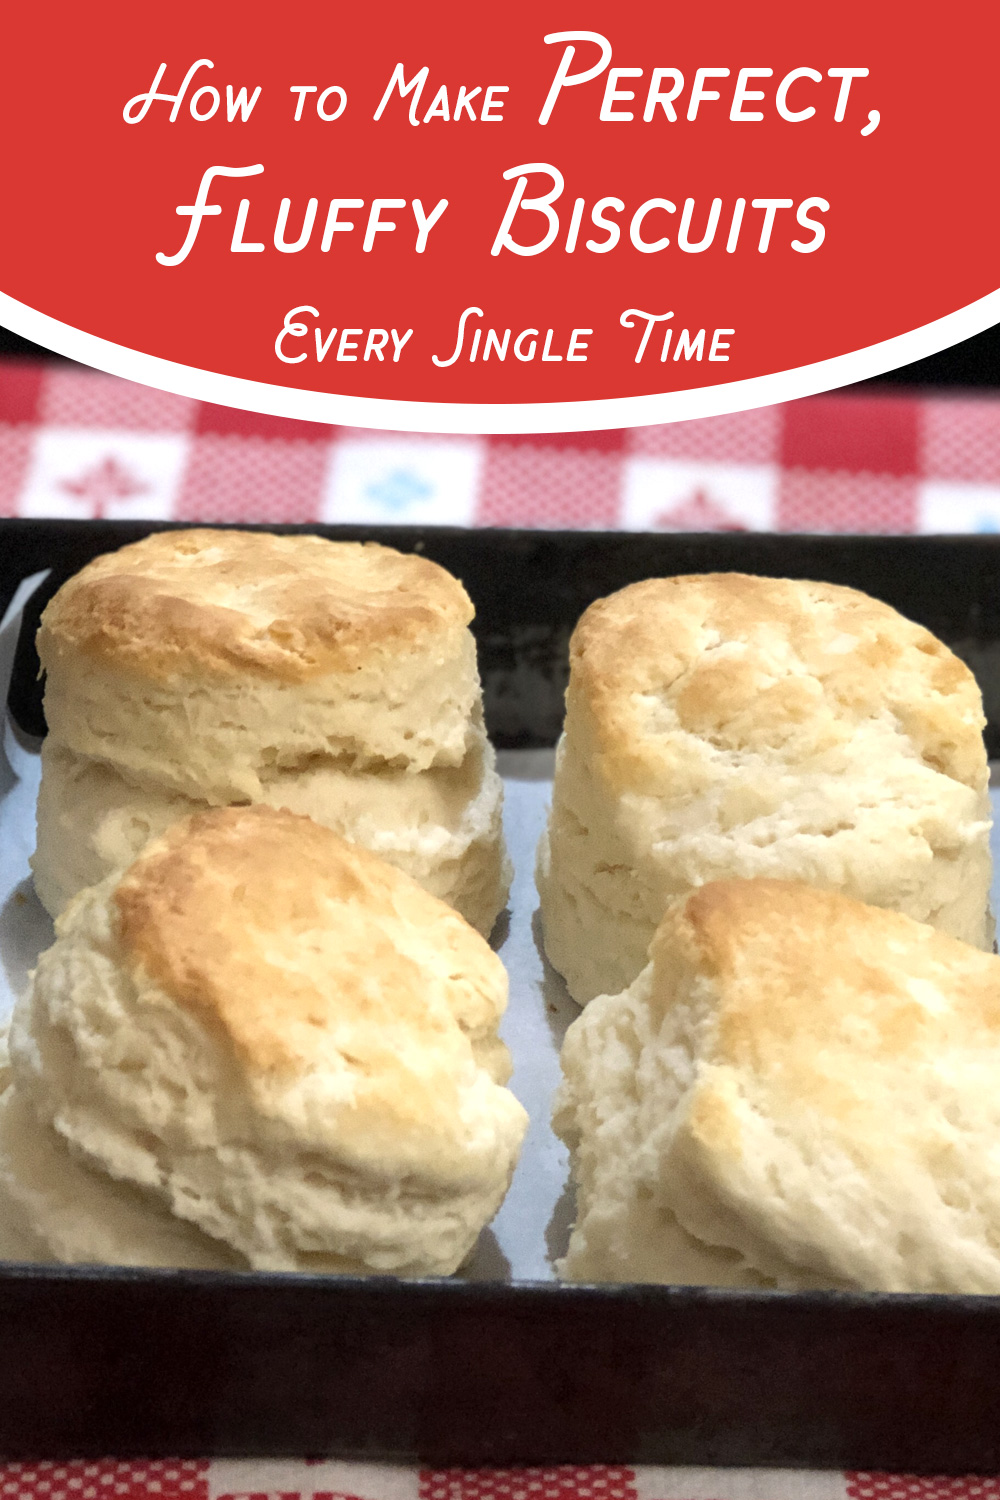 How to make fluffy biscuits